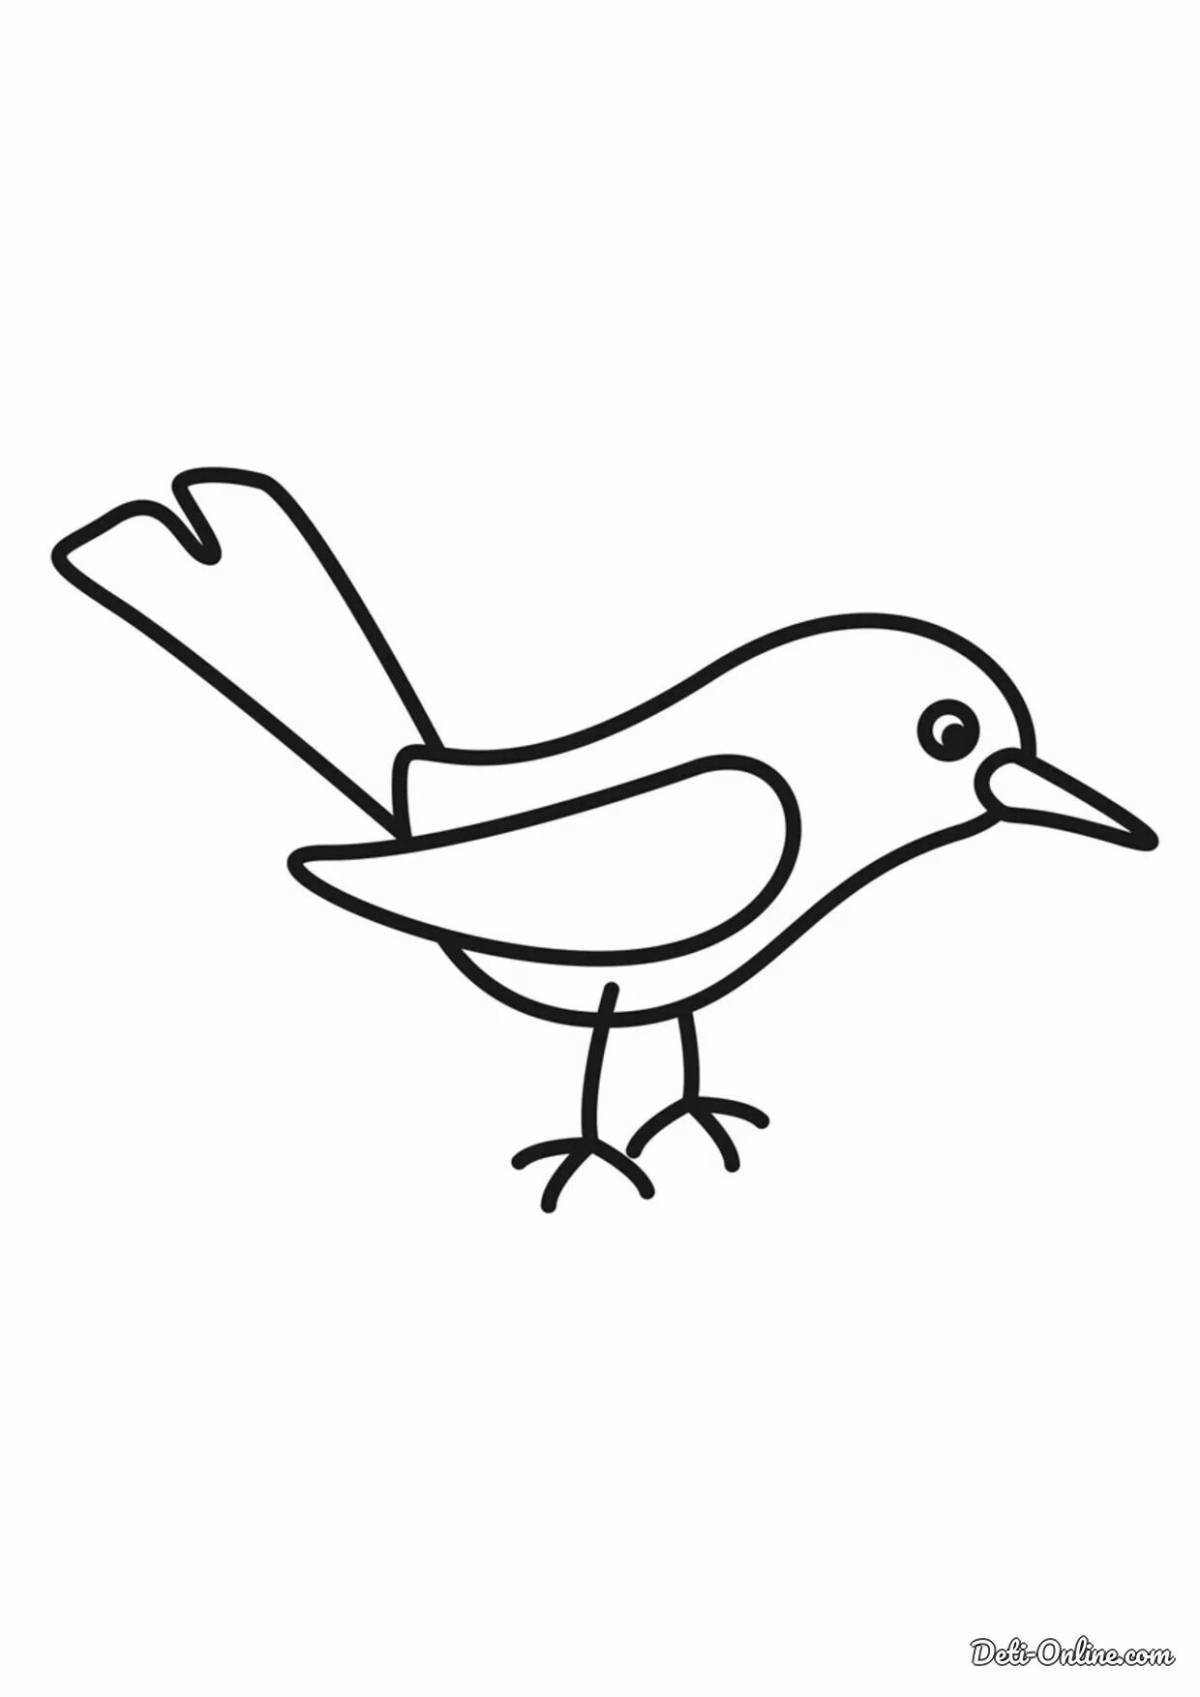 Great bird drawing for kids